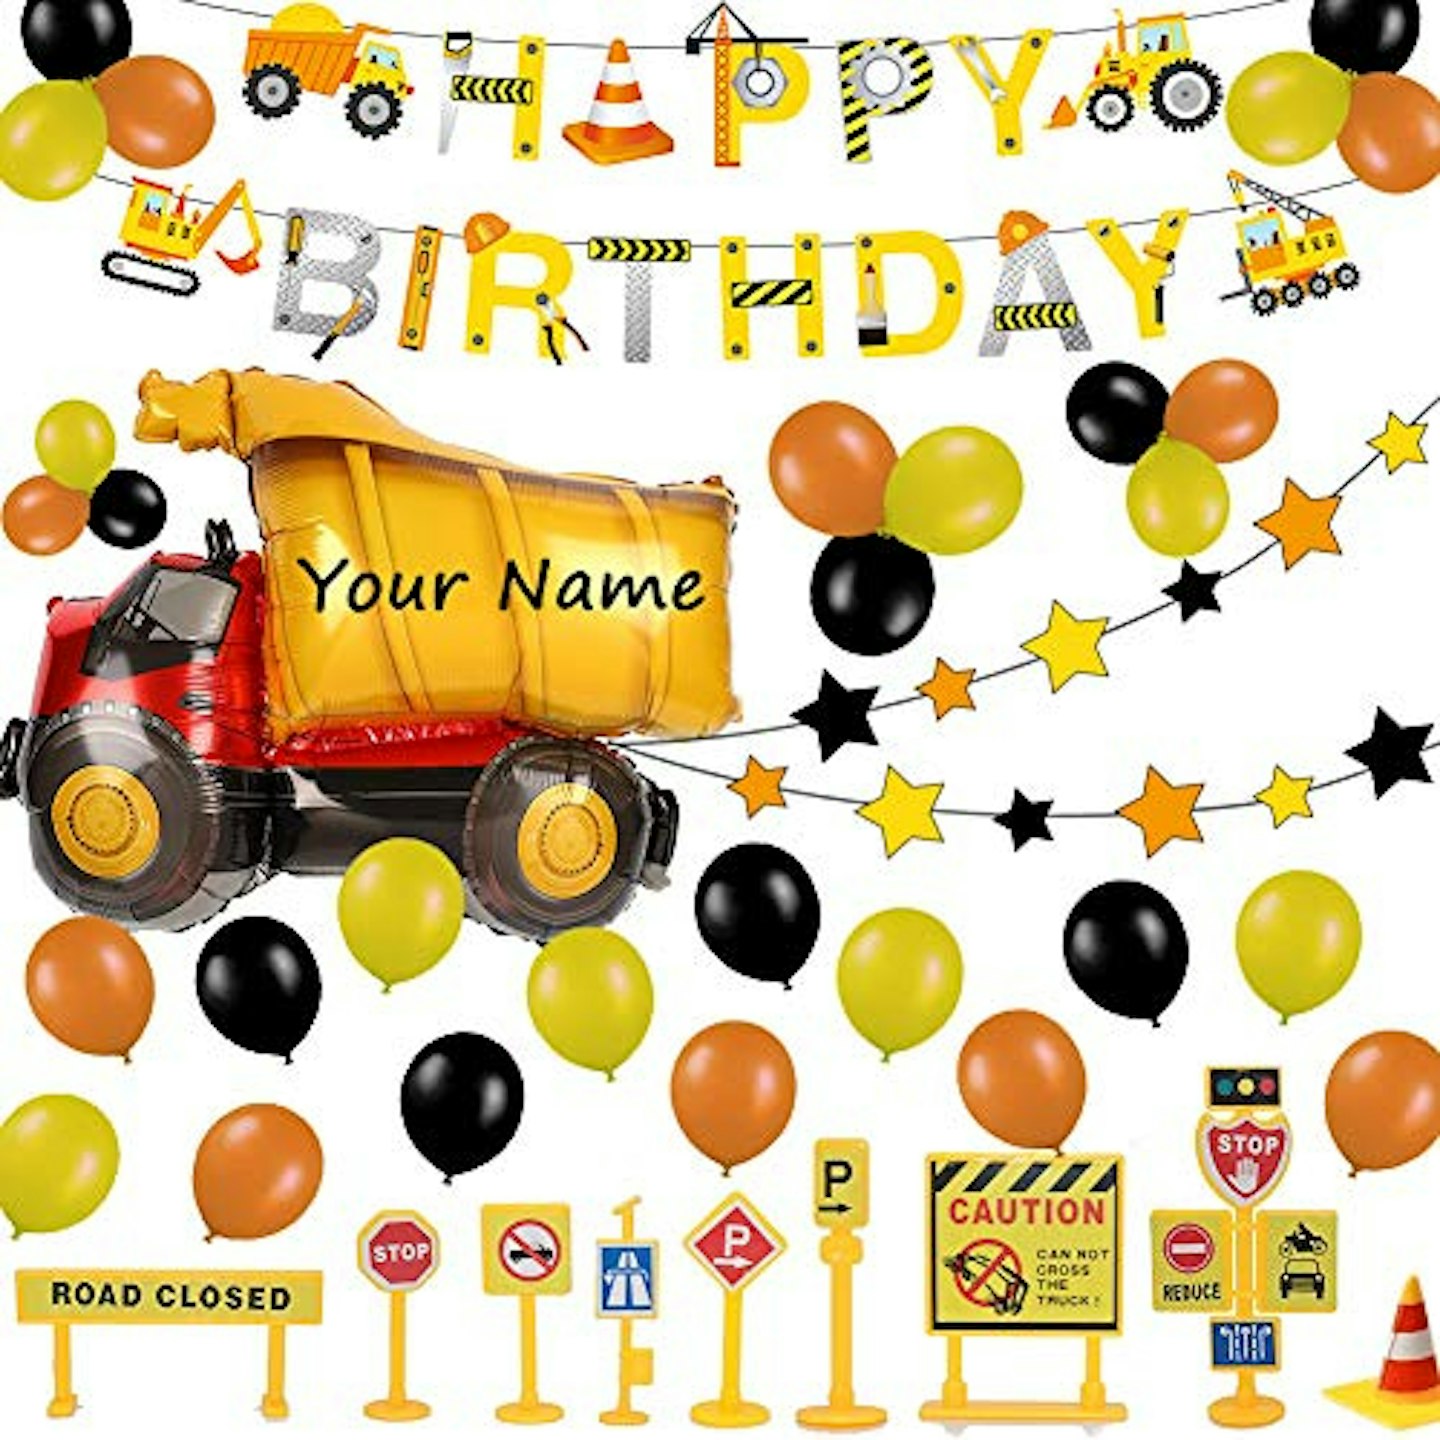 52 Pieces Construction Birthday Party Supplies Kit